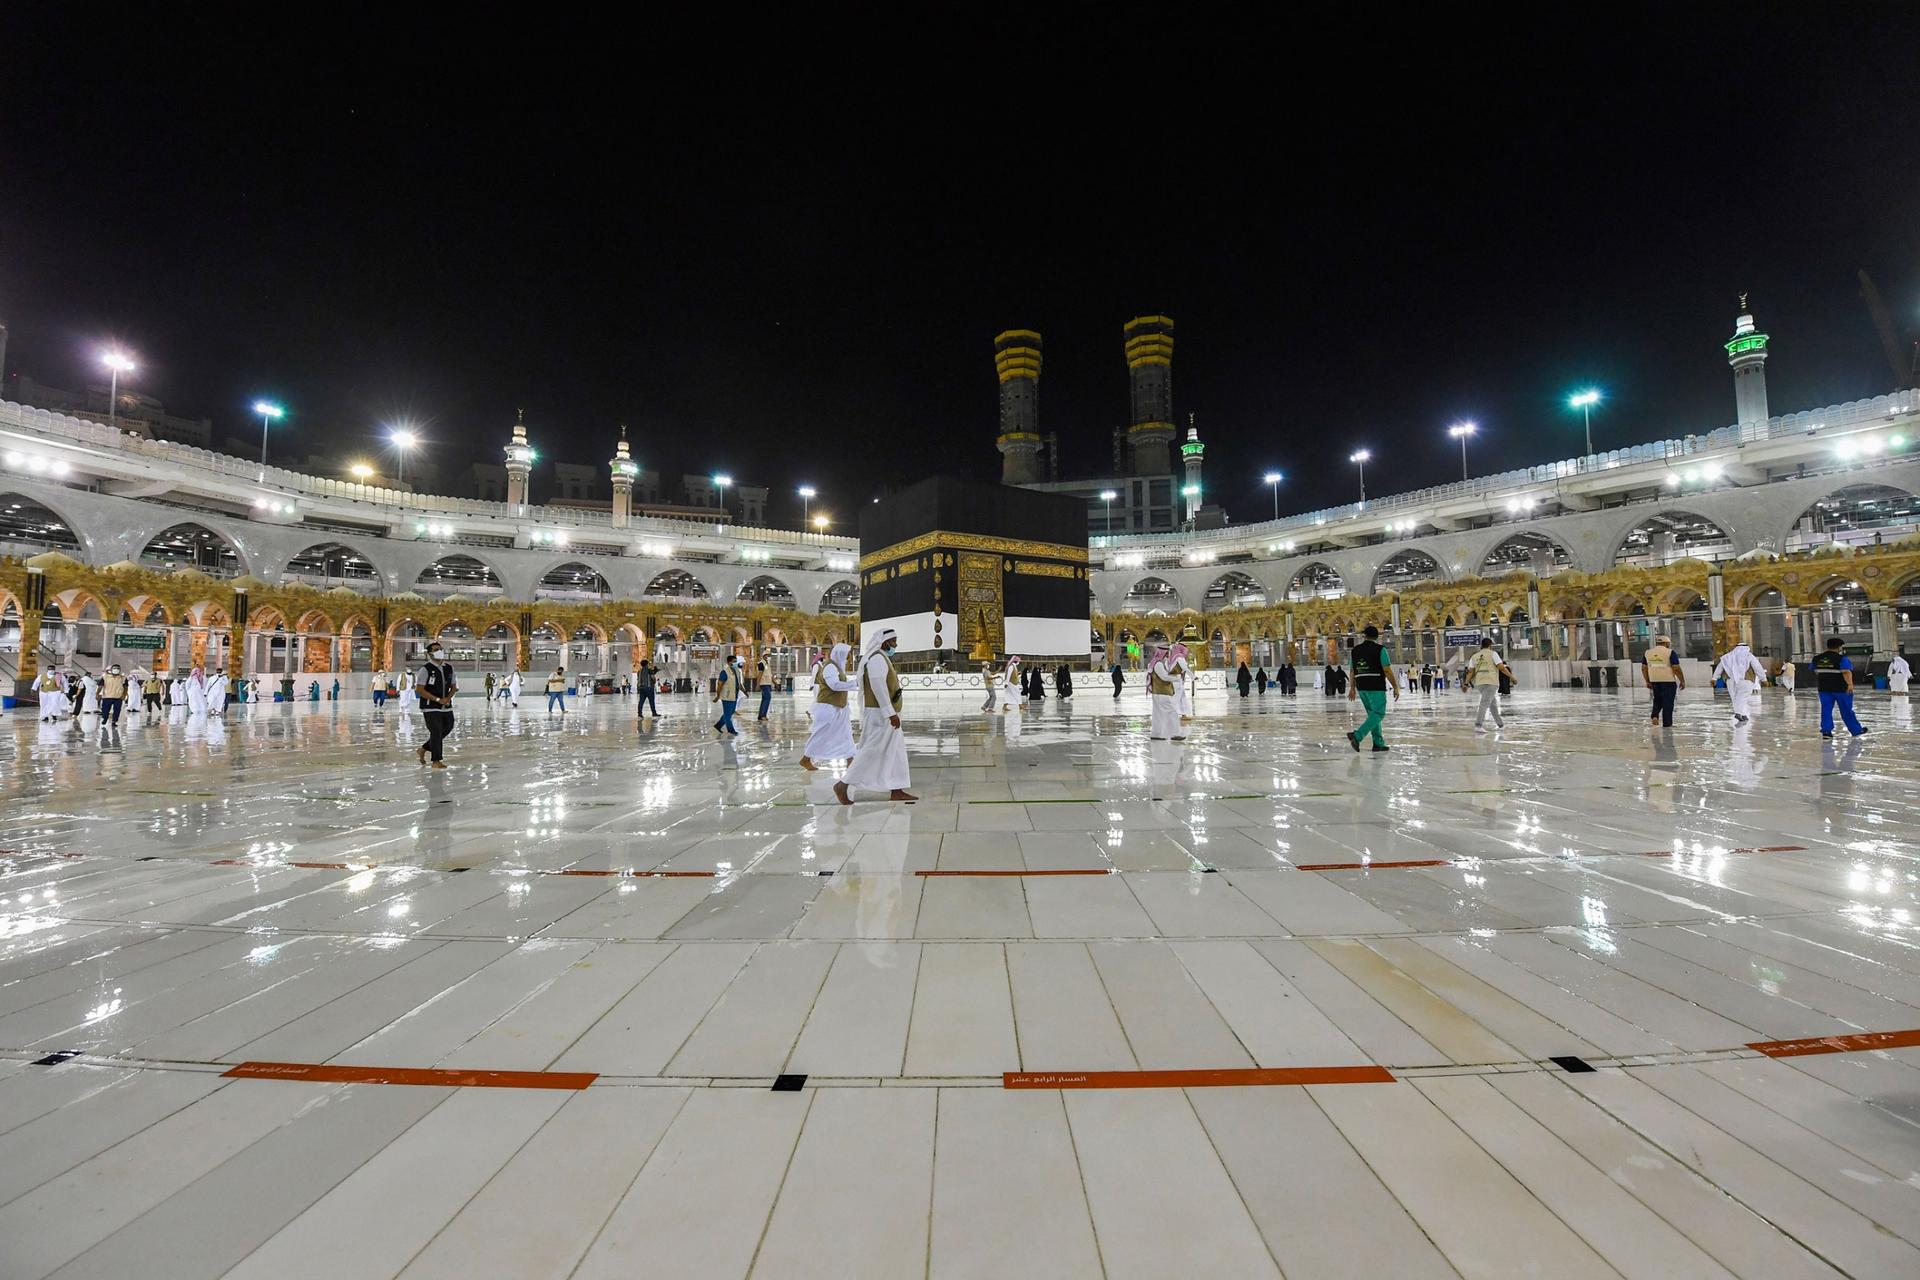 Workers make preparations for the hajj with lights on around the facility showing a shiny floor.